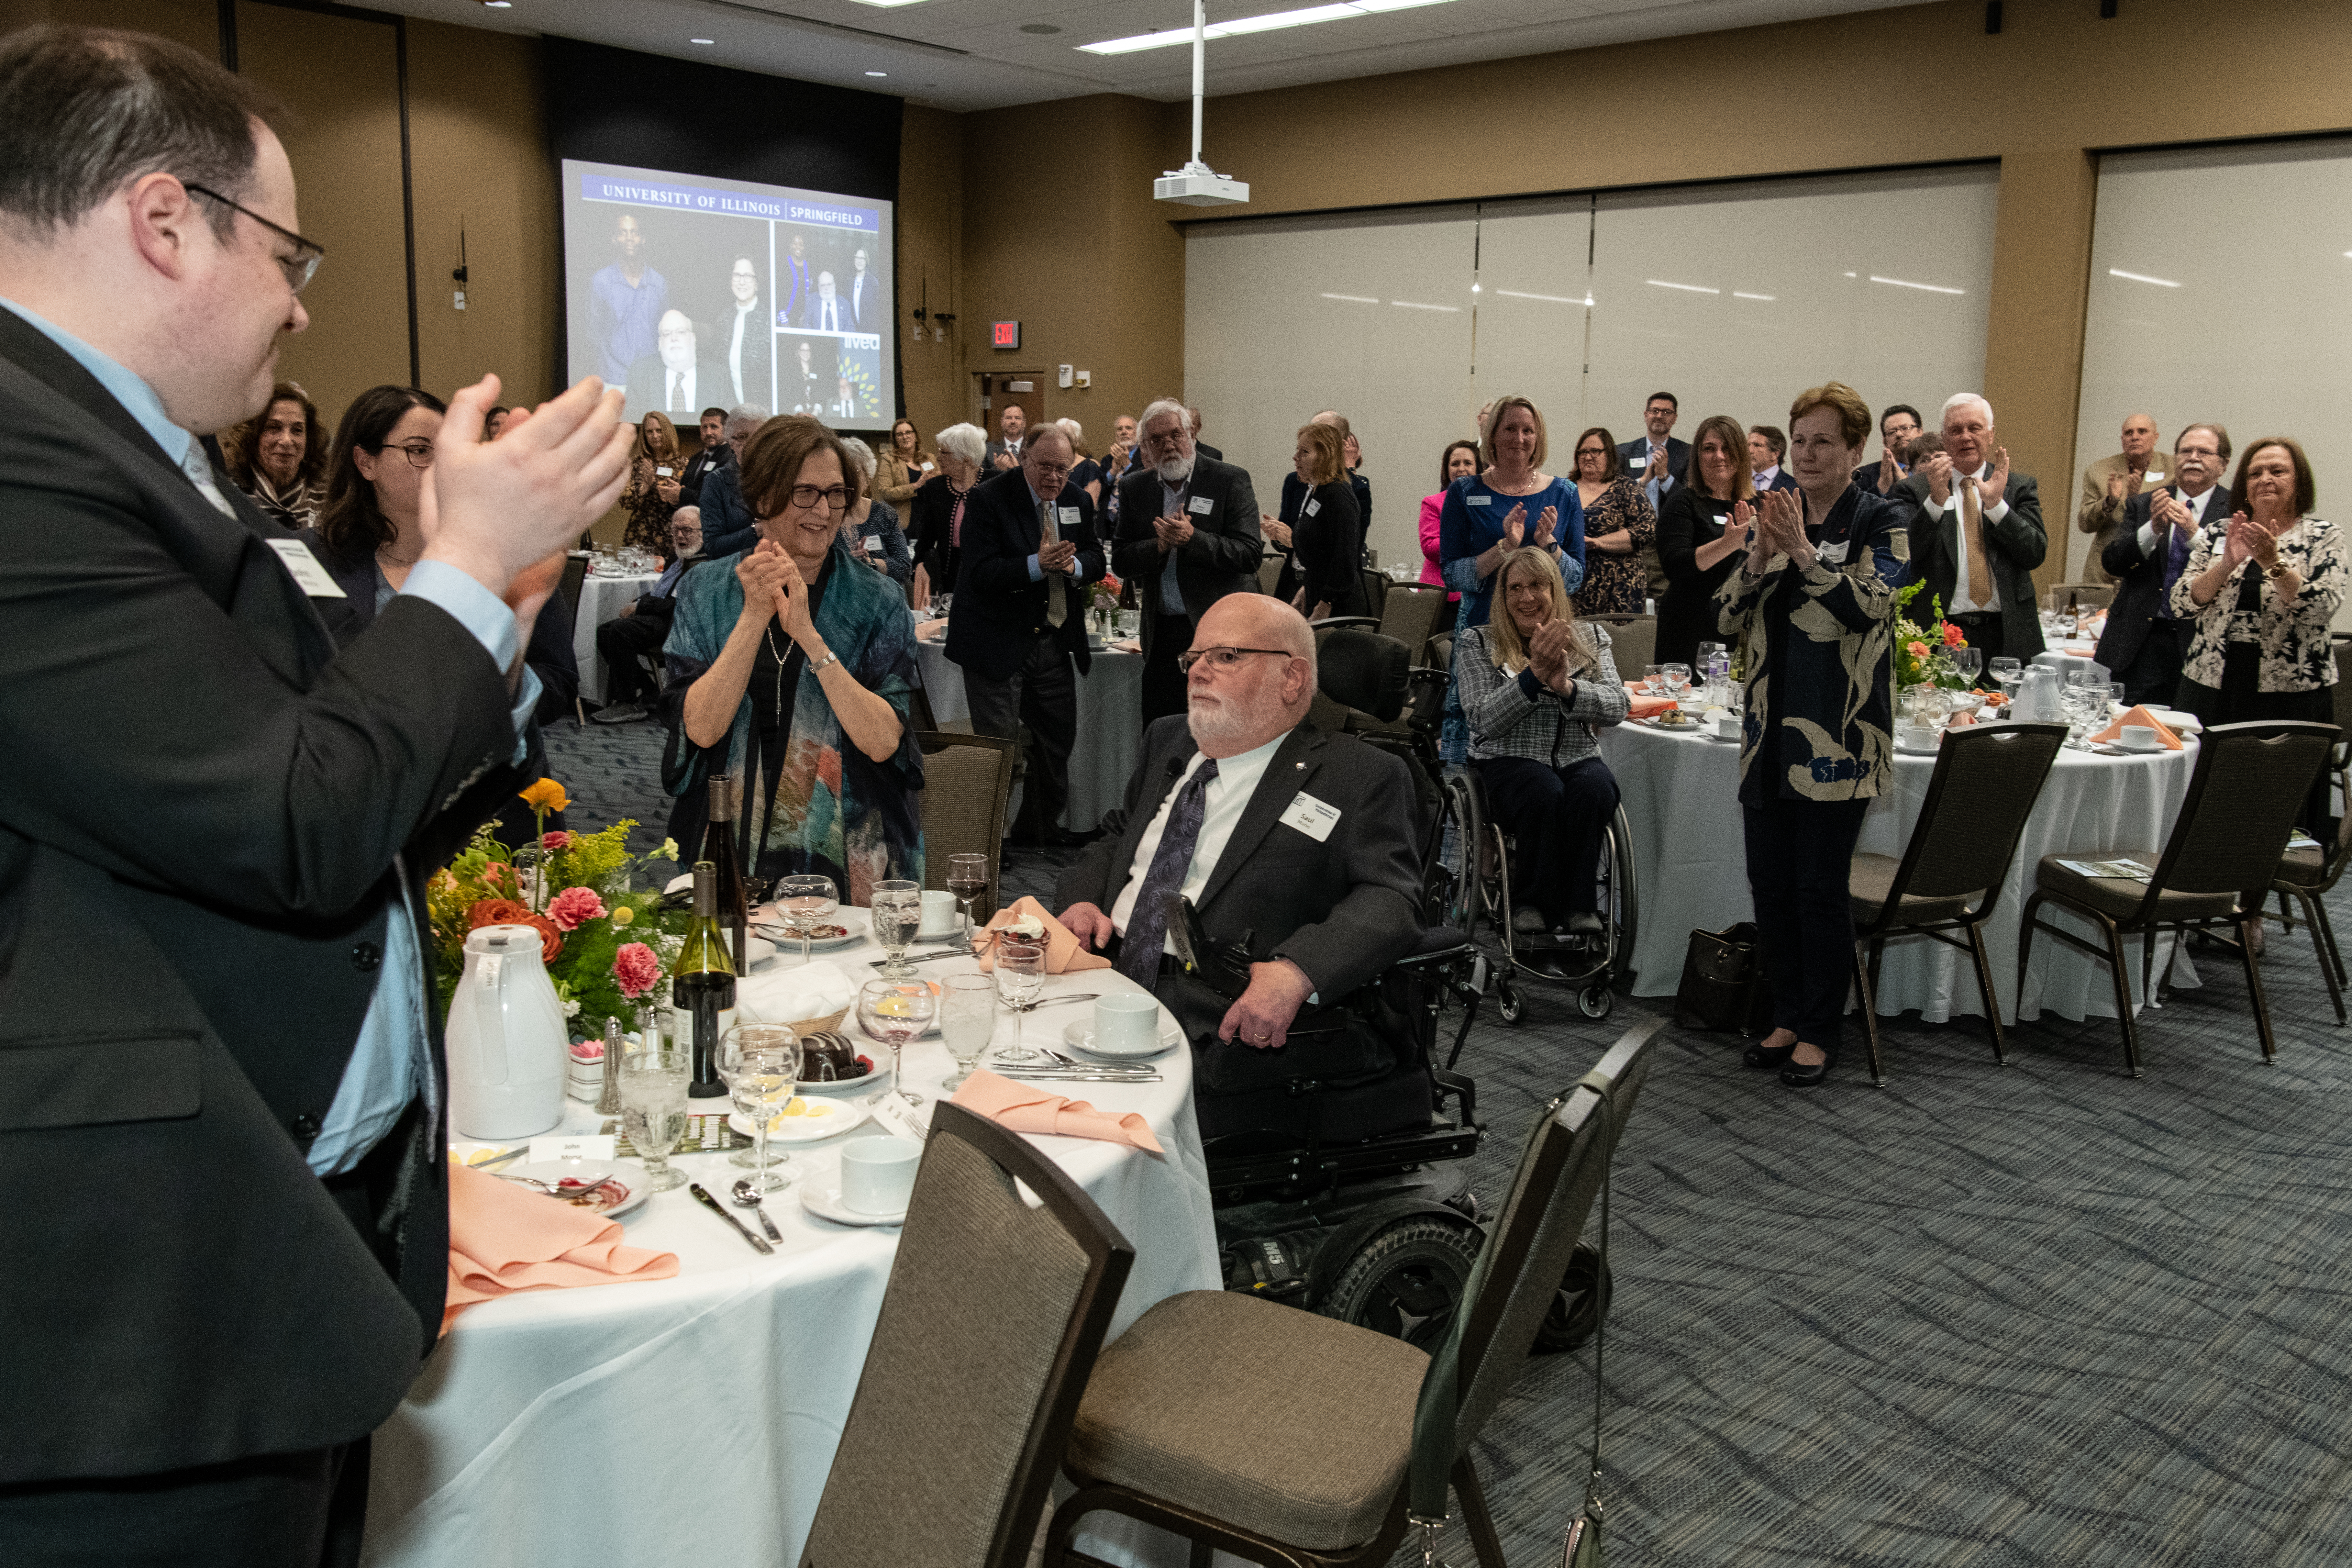 A crowd gives a standing ovation after a winner of an award is announced